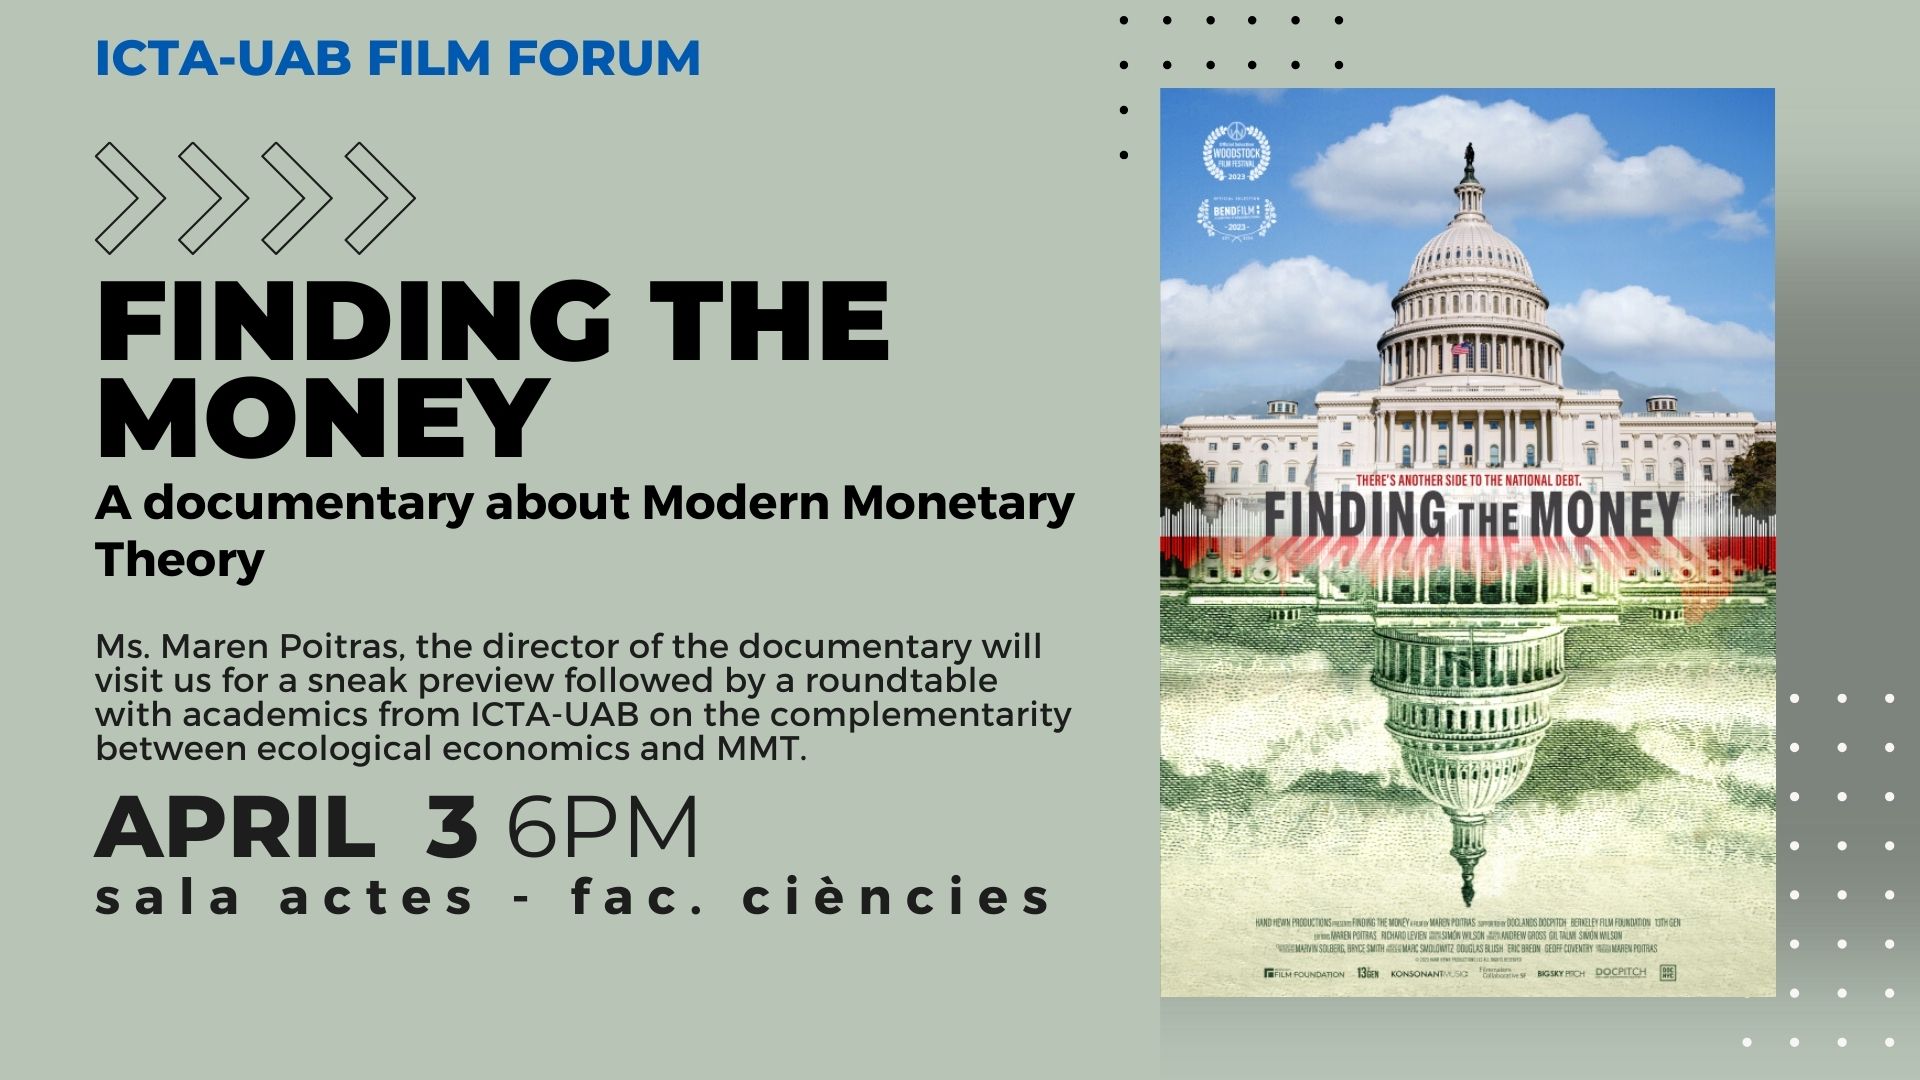 DOCUMENTARY FINDING THE MONEY